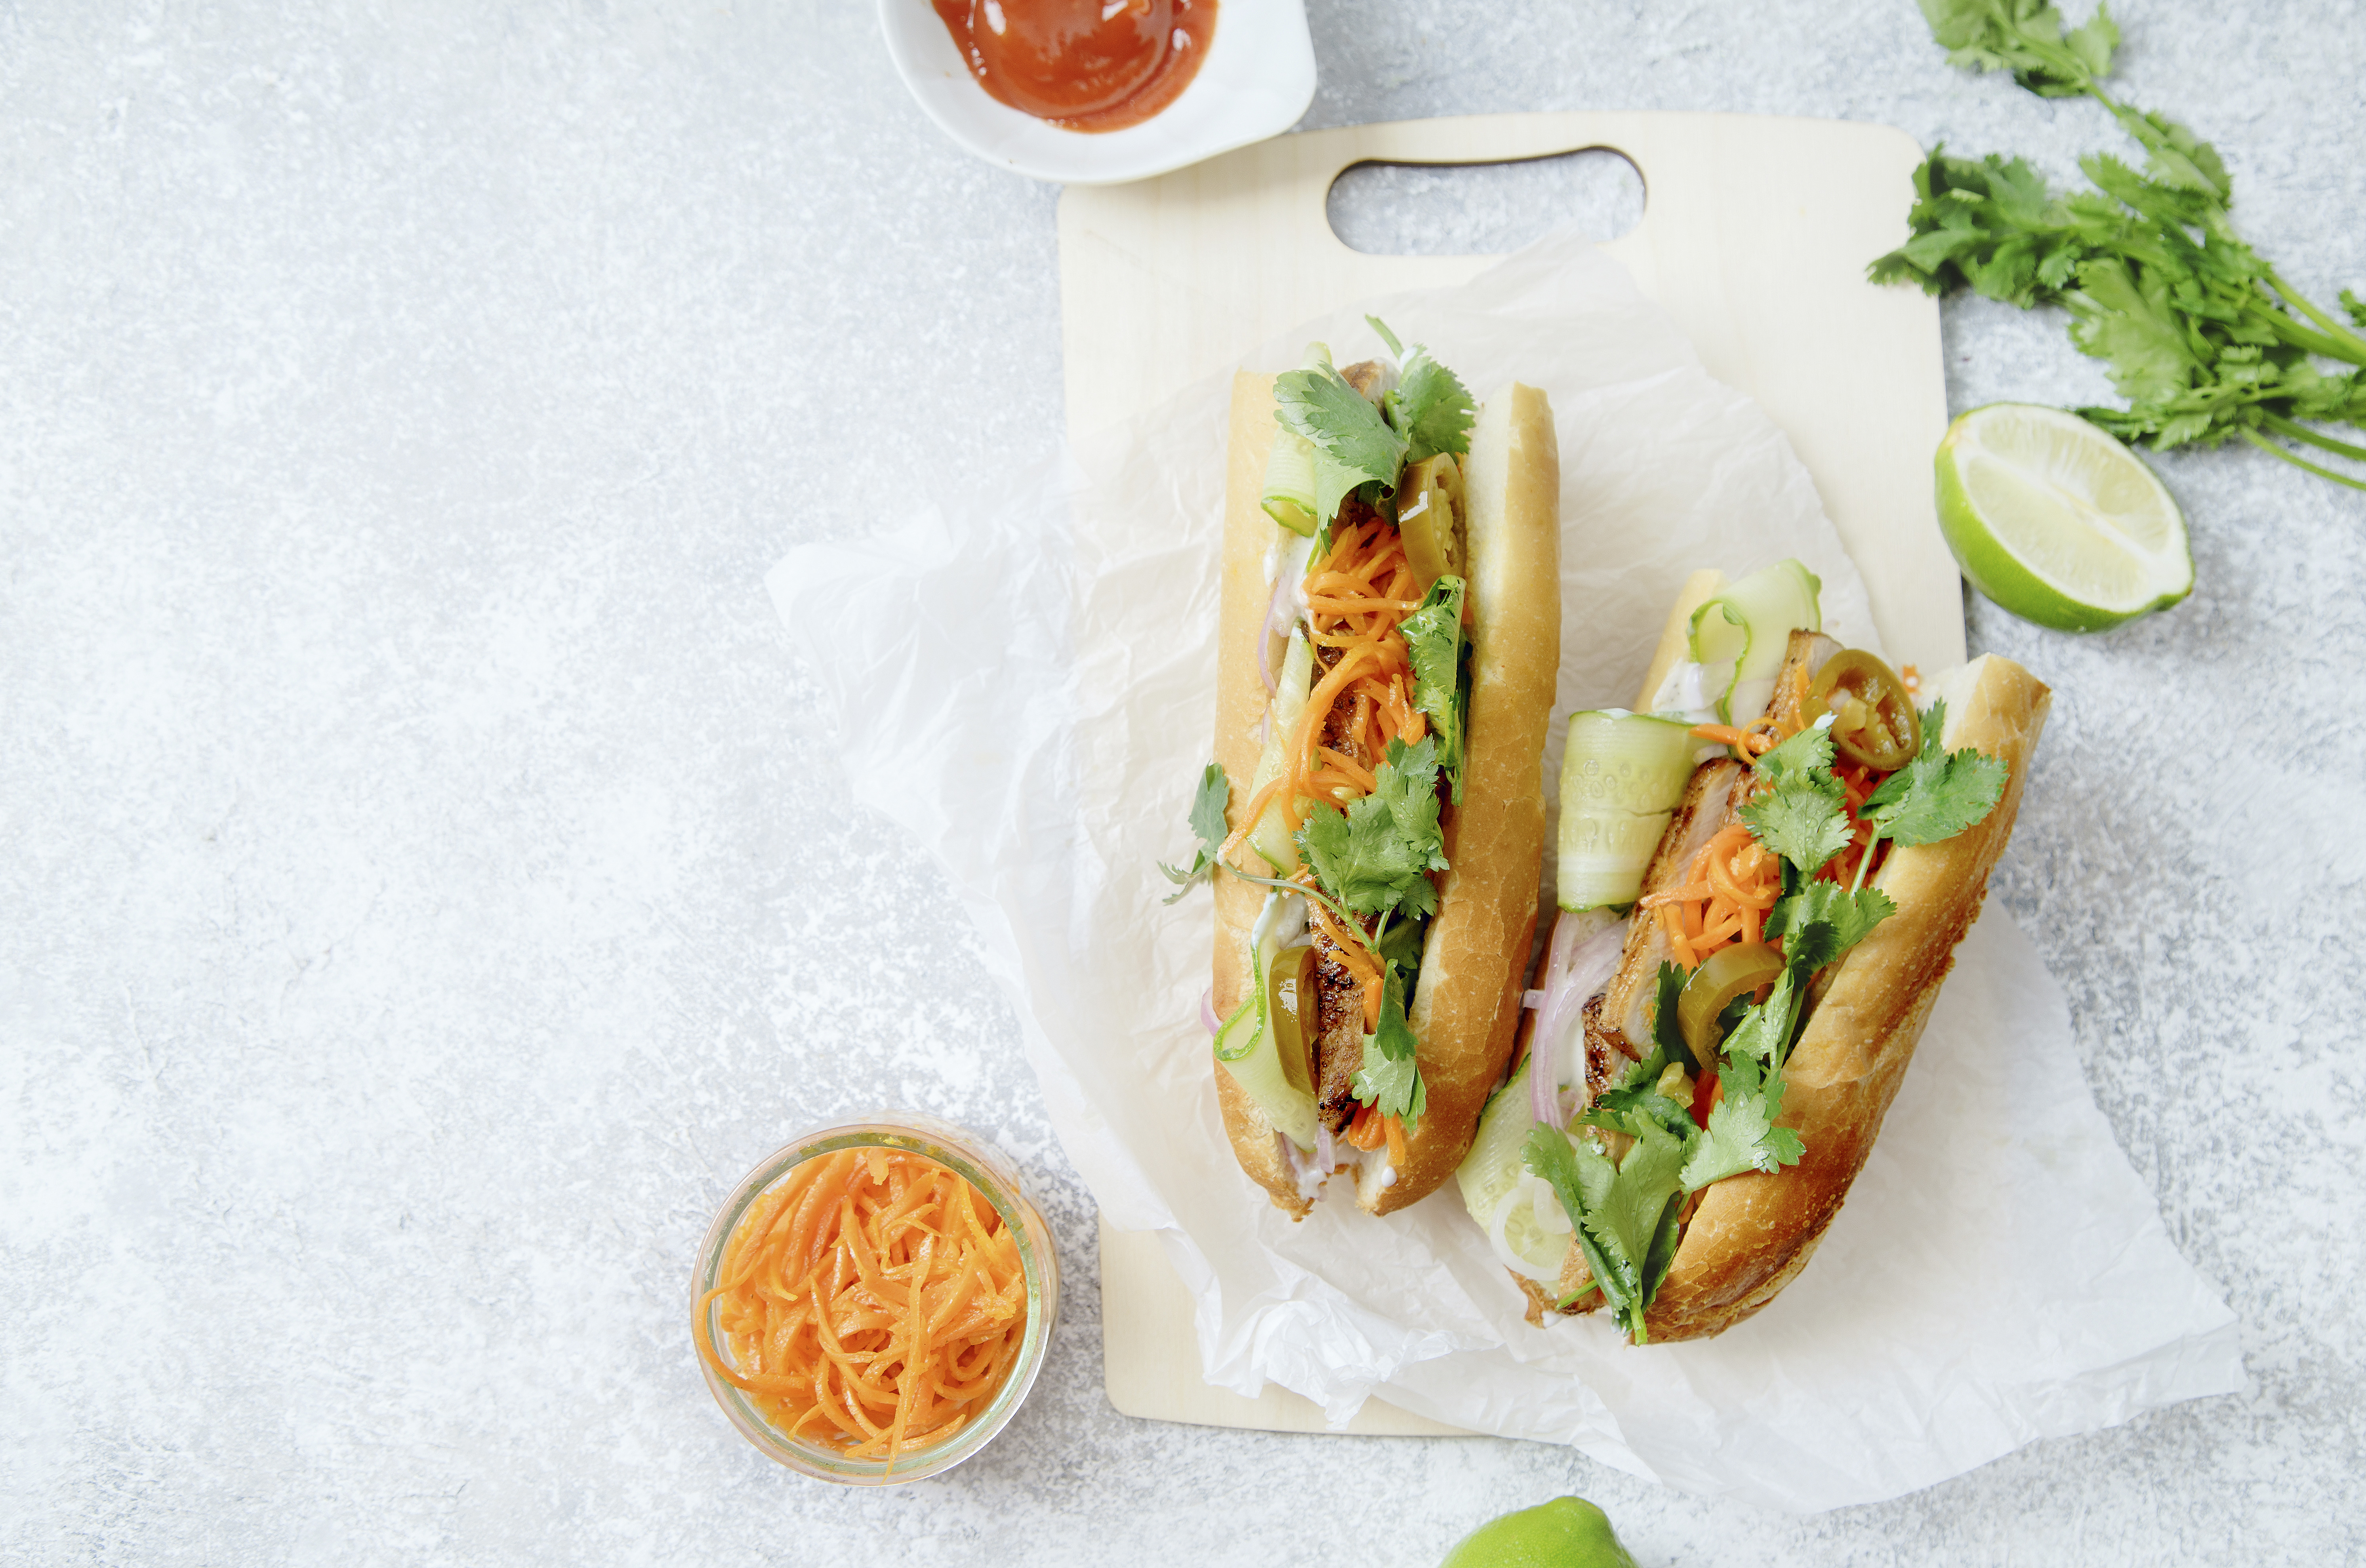 Classical banh-mi sandwich with sliced grilled pork tenderloin, carrots, cucumbers, jalapeno peppers and cilantro